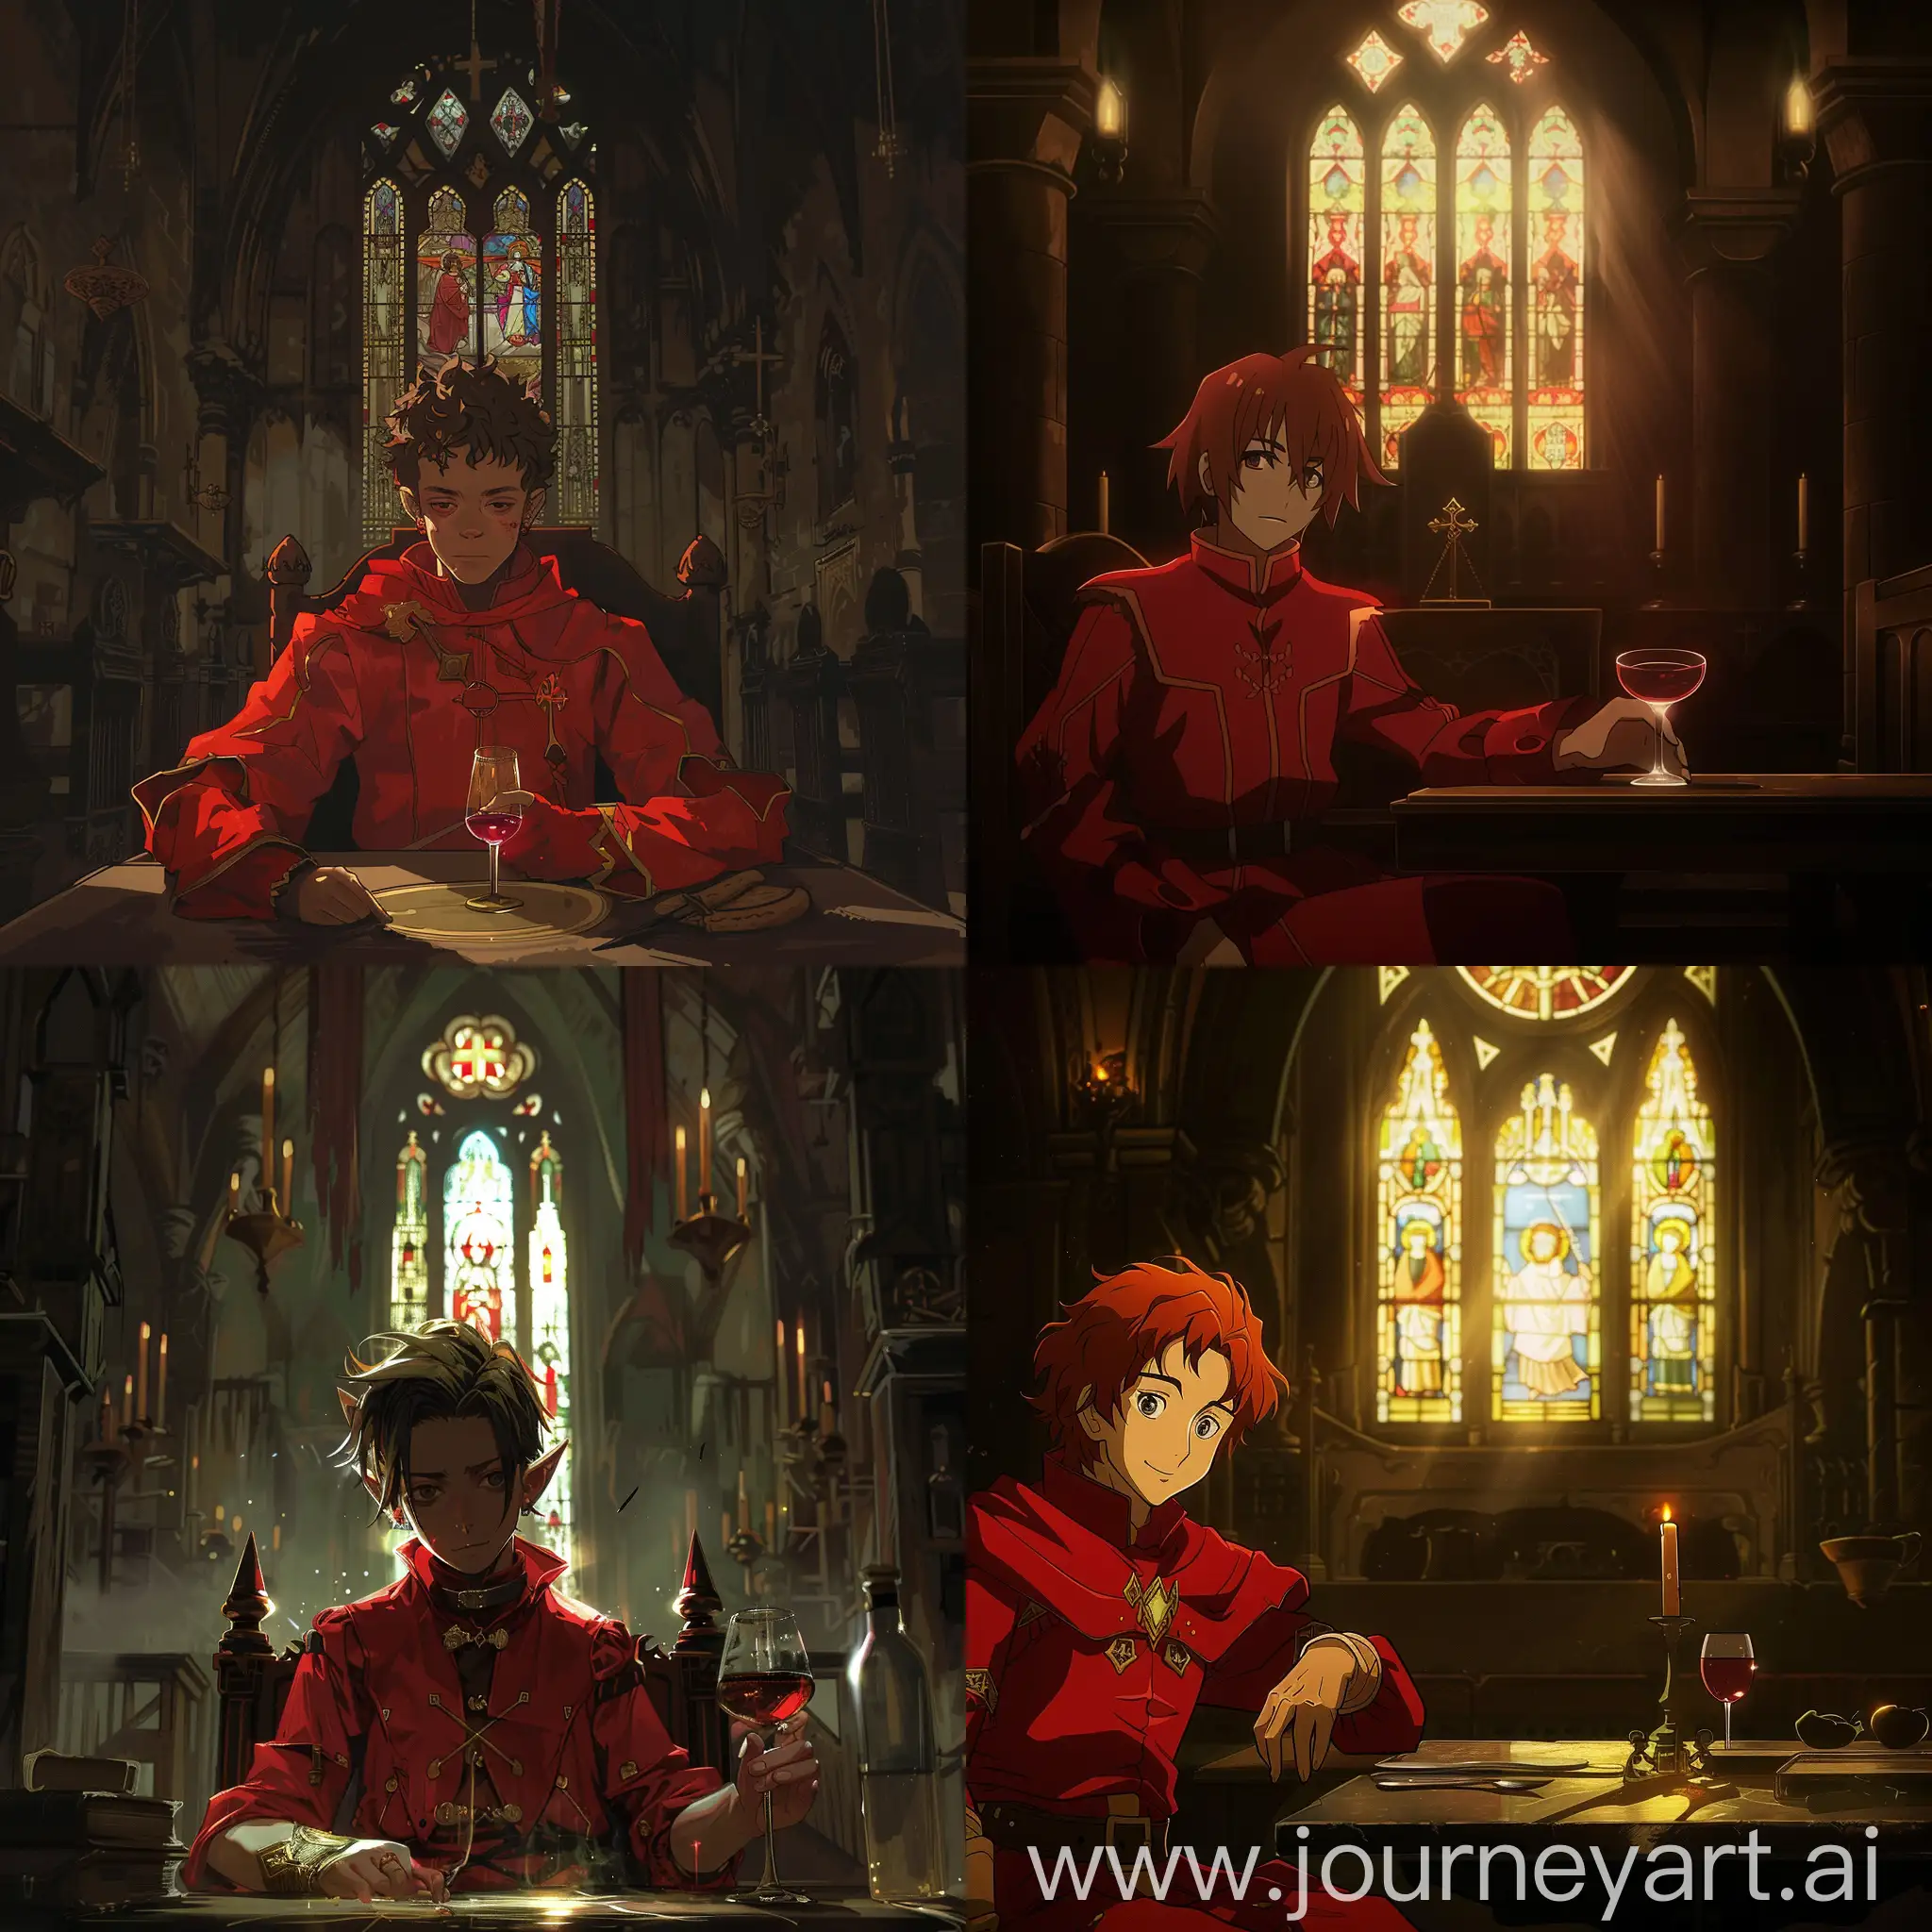 Dark-Medieval-Anime-Scene-Sinister-Elf-Man-with-Wine-in-Gothic-Setting